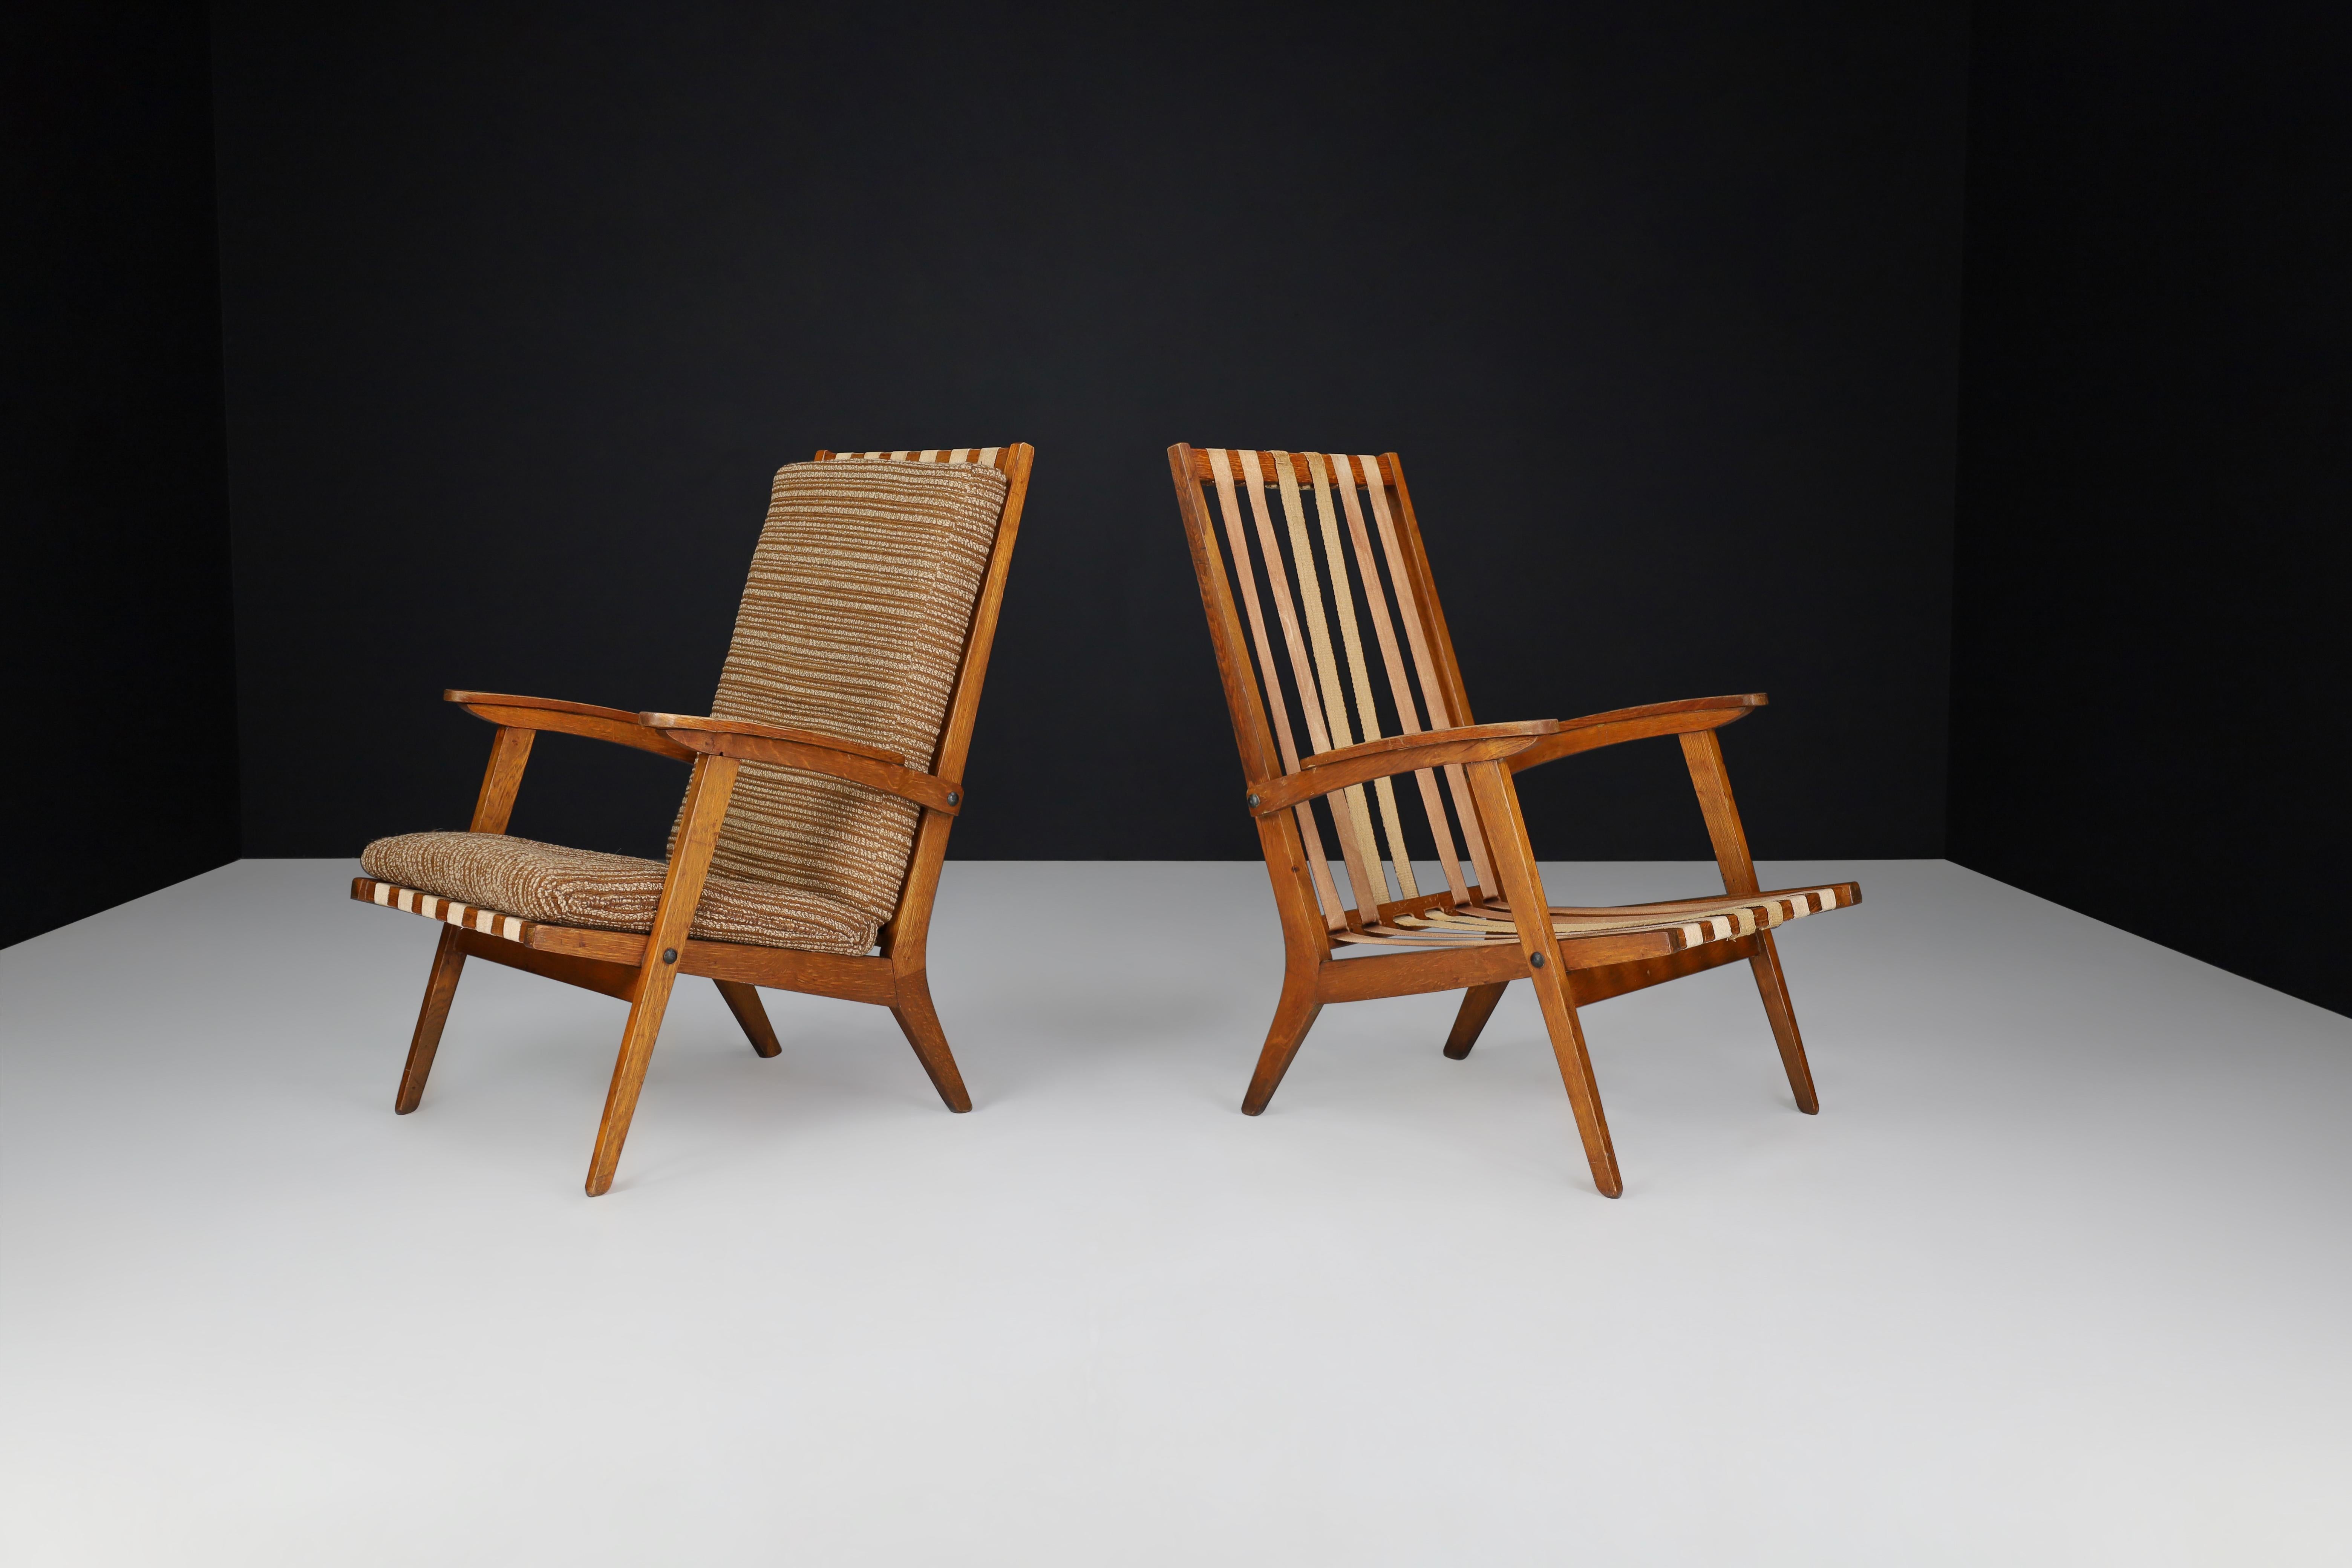 Oak Sculptural Lounge Chairs with Brown Upholstery, France, 1950s For Sale 1